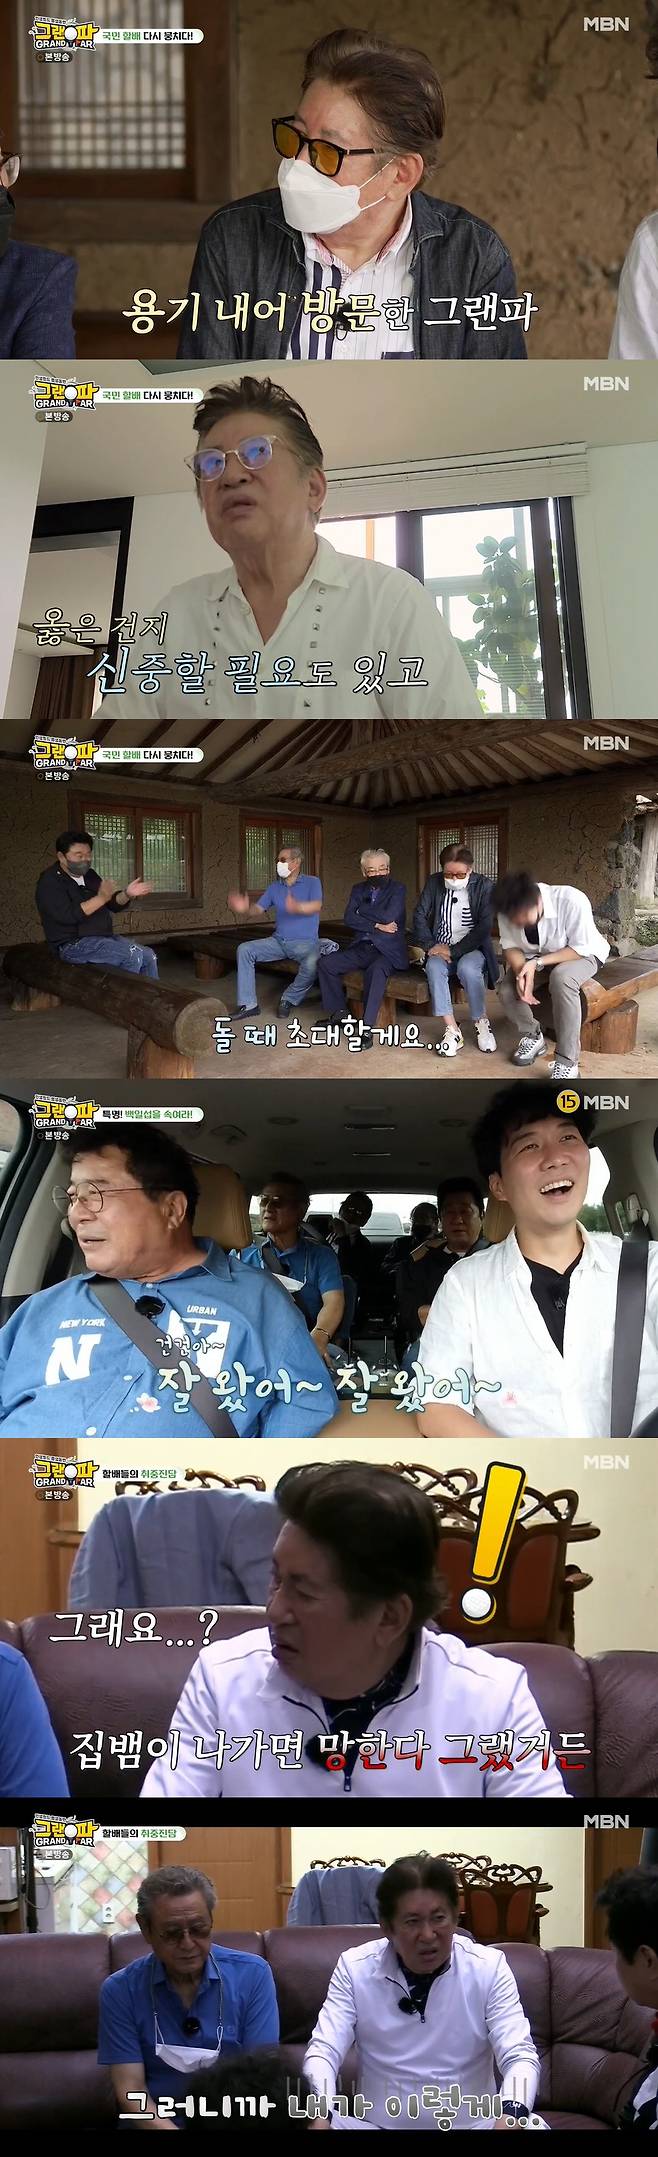 Actor Kim Yong-gun has revealed his pregnancy scandal heart.Kim Yong-gun appeared in MBN Granpa, which was first broadcast on the 6th, and fixed member Lee Soon-jae - Park Geun-hyung - Baek Il-seob - Lim Ha-Ryong and Golf traveled to Jeju Island.The members of the Grandpa were surprised by Kim Yong-guns surprise appearance, but soon they were welcomed by Kim Yong-gun.Kim Yong-gun said, I am sorry to have been disturbed by a word. I was hesitant when I was first invited.But when I asked around, I visited my courage because everyone said it was better to broadcast. Kim Yong-gun also said in a preliminary interview with the production team, I need to be careful about whether I am right or not, and I am hesitant.But thanks to the members of the Grandpa, I was able to get courage.Lee Soon-jae said: I was a bit worried at the beginning, what to do.But Kim Yong-gun was also Kim Yong-gun, and Kim Yong-gun said, I will invite you when I go back to it. Kim Yong-gun said, I was surprised to see a snake in the bathroom earlier, while having a drink at the hostel with members of the Grandpa.Lim Ha-Ryong said, A 2m slug appeared during the army, but three days later, I came out again and shared it together.But a few days later, the GP was on fire, he said. When I catch a house snake, it is perfect. Park Geun-hyung also said, I have said that if the house snake goes out from the old days, and Kim Yong-gun, who was listening to it, said, It sometimes appears in our Yangpyeong house.I saw it two or three times, and one hit it with a broom, he said, and laughed, saying, So Ive had such a big deal.Kim Yong-gun thanked the members of the Granpa on the day, especially expressing gratitude for the Baek Il-seob, saying, I made three calls.I was grateful for saying that it was nice to have a drink of soju. Lee Soon-jae said, Its because I have the virtue that Yonggeon has done.It is a virtue to say that you help me when you are in trouble and give me words of encouragement. Kim Yong-gun said, Its my disapproval, and Im not enough. I was grateful and got a great strength. I was really grateful for worrying with you.I was grateful for the strength, and I did not speak, so I was really in a situation where I was in a bad situation, he said.It means that the image is not so bad, I came to the Grandpa, said Baek Il-seob.As soon as the atmosphere got heavy, Kim Yong-gun said, I was one of 70,000 people, worldwide.So, Kim Yong-guns power I think this AD will come in, he said, 79 gold gag was a rash.Kim Yong-gun was previously caught up in an extramarital pregnancy scandal in August.He was accused of forcing a pregnancy termination to a 39-year-old couple A who had been dating for 13 years.Kim Yong-gun met Mr. A and apologized for his sincerity, and Mr. A, who had misunderstood, dropped the complaint and the controversy ended.Kim Yong-gun later said he would put his child to his family register and actively support Child Birth and Child Care.